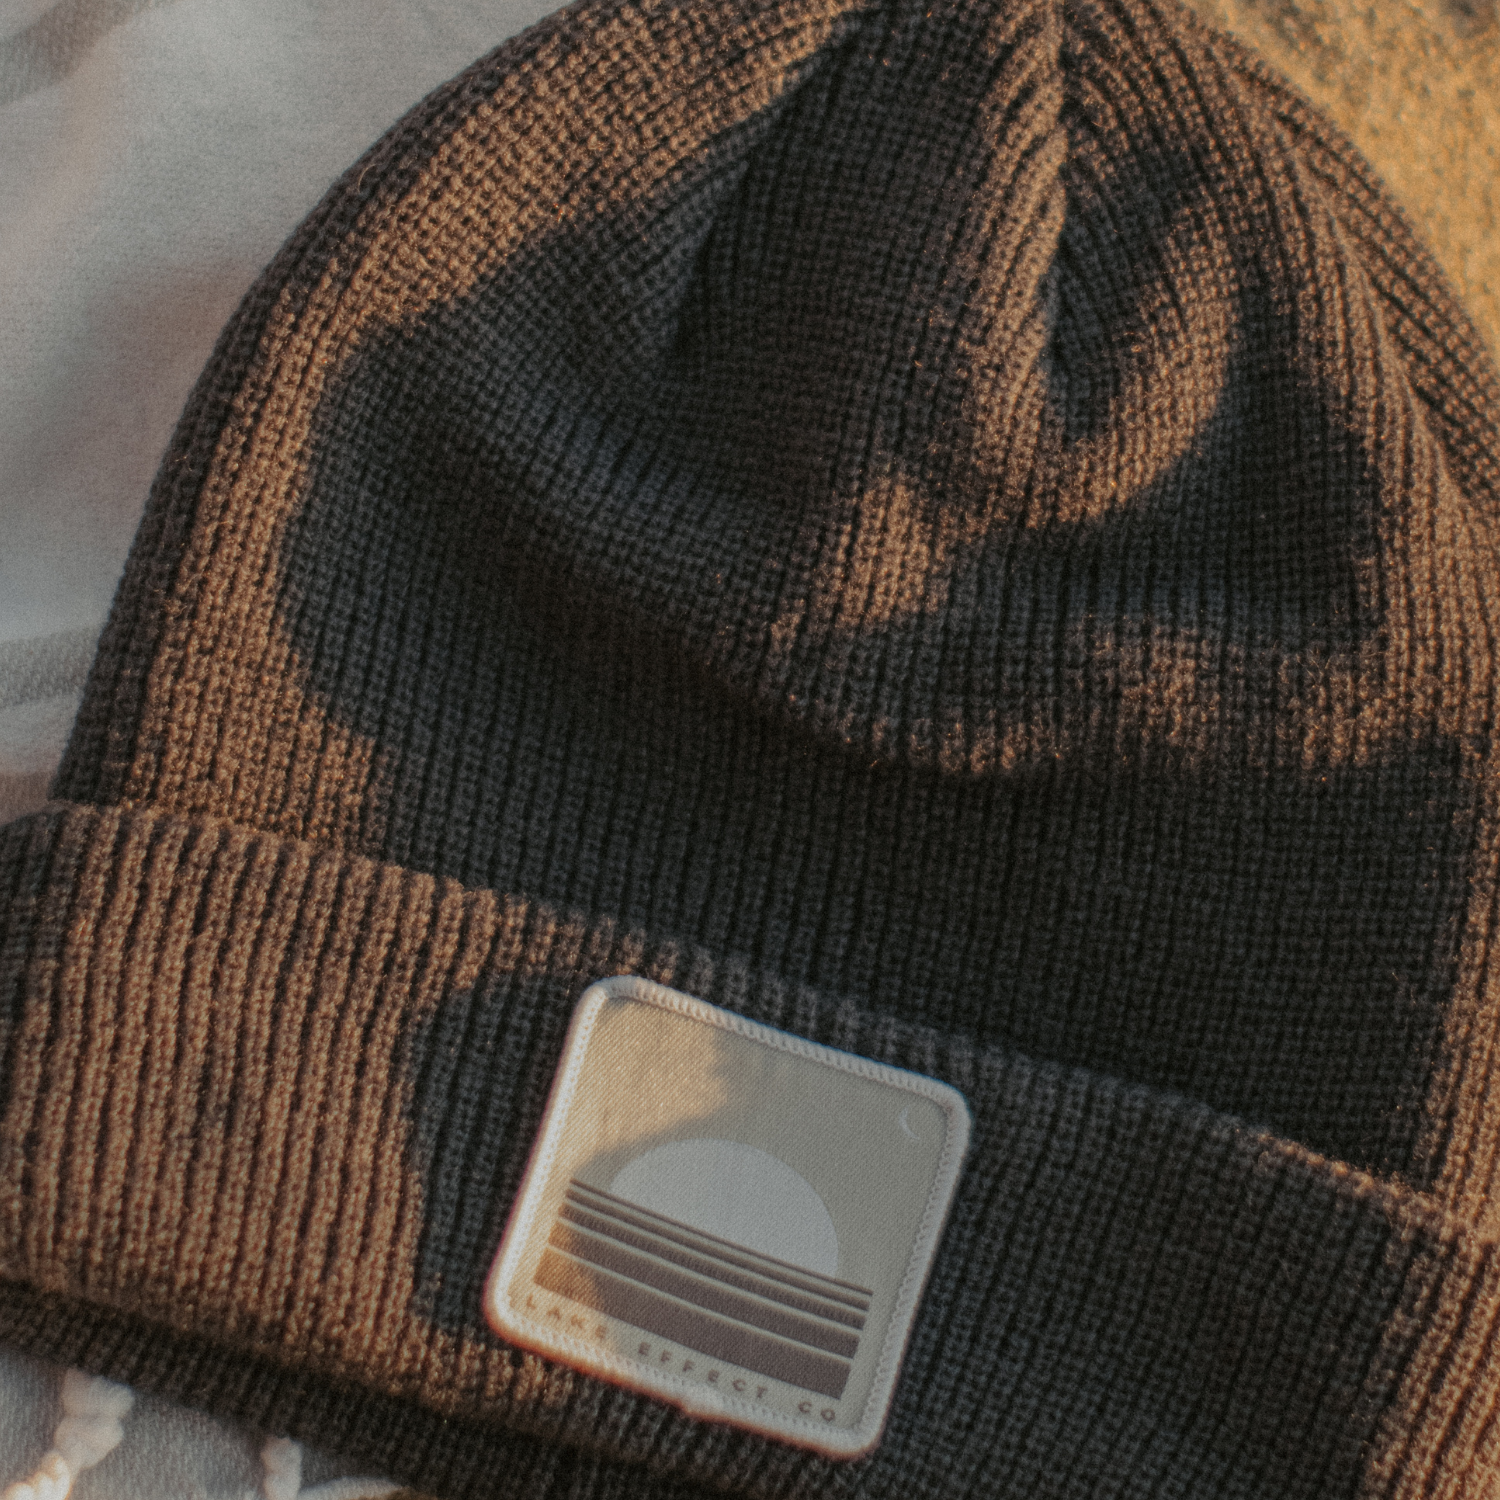 SUNSET + CRESCENT Beanie | Recycled Blend Winter Hat